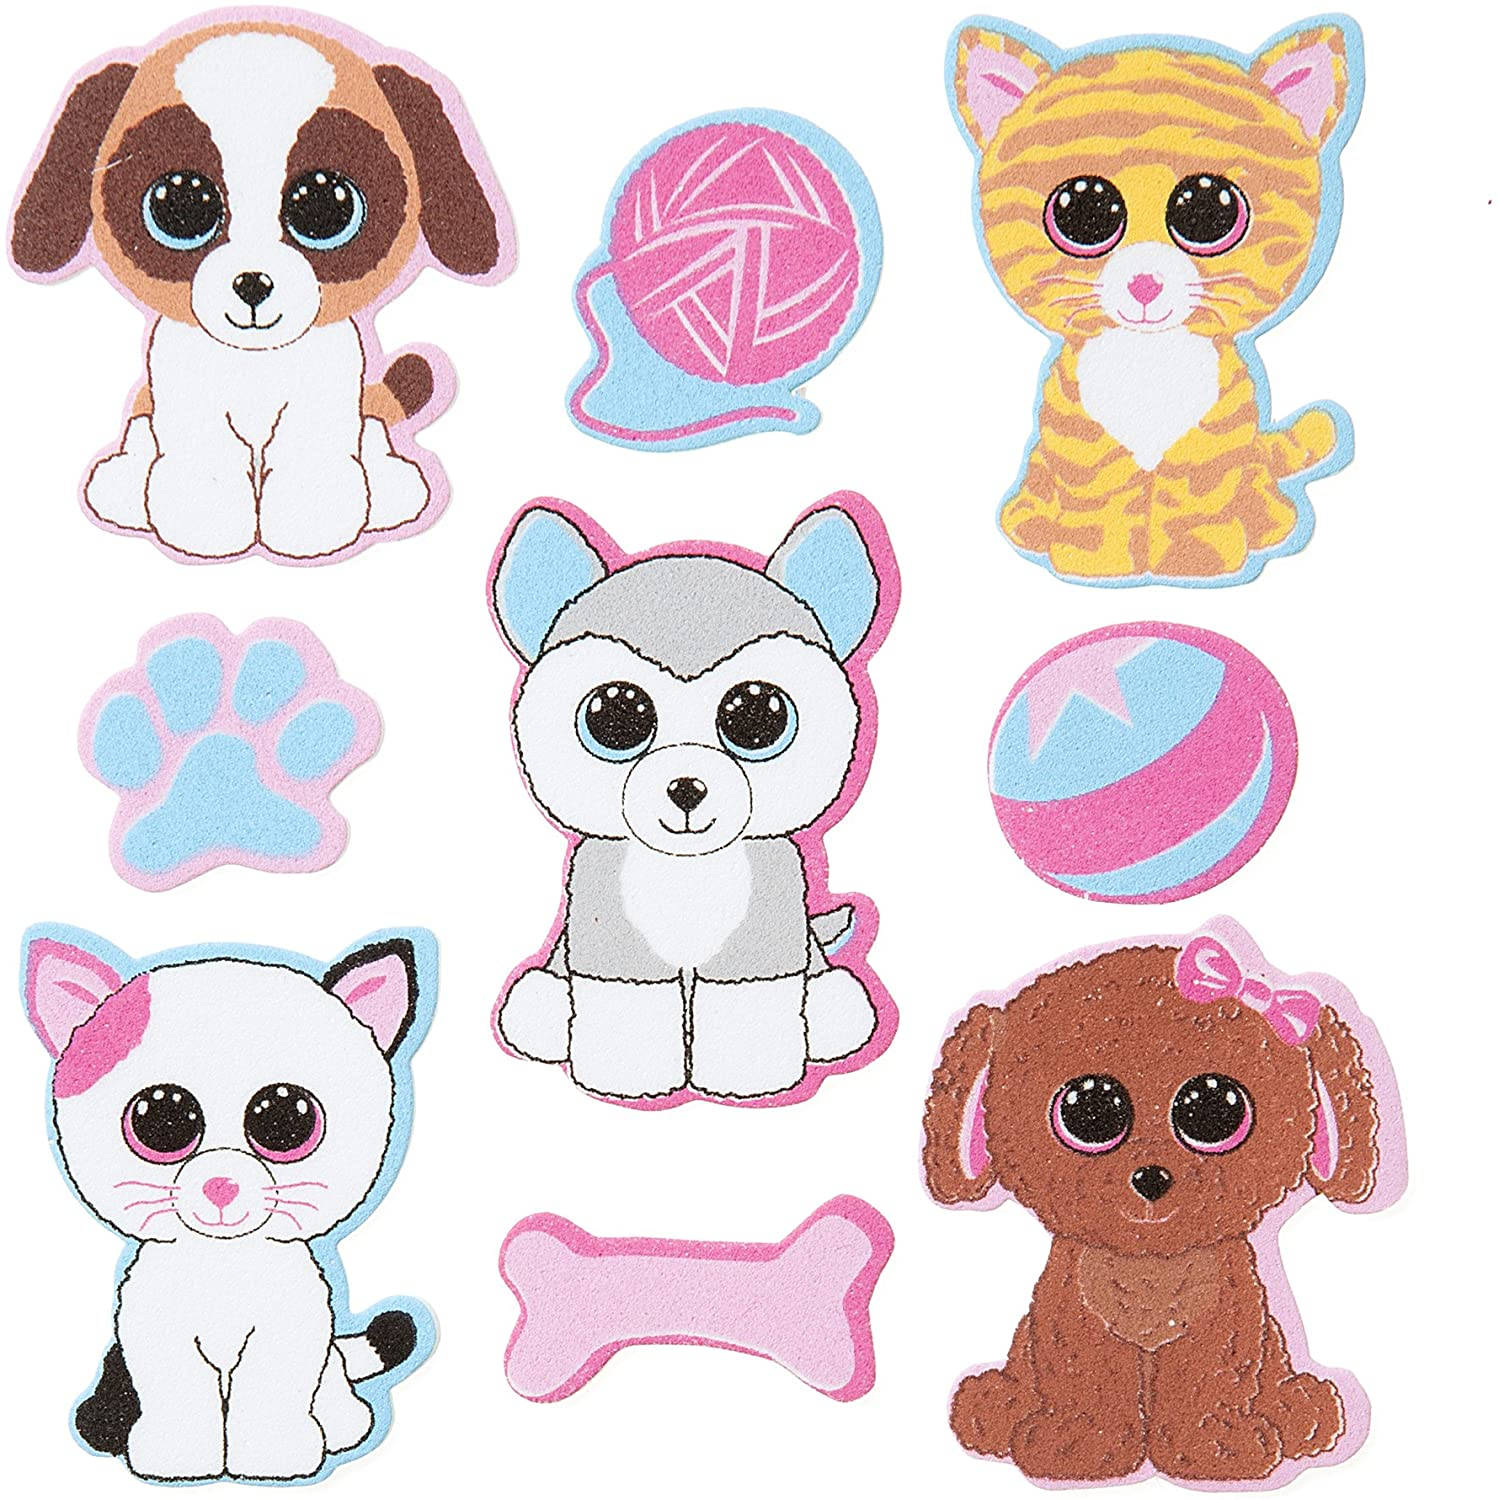 Cat And Dog Beanie Boos Wallpaper